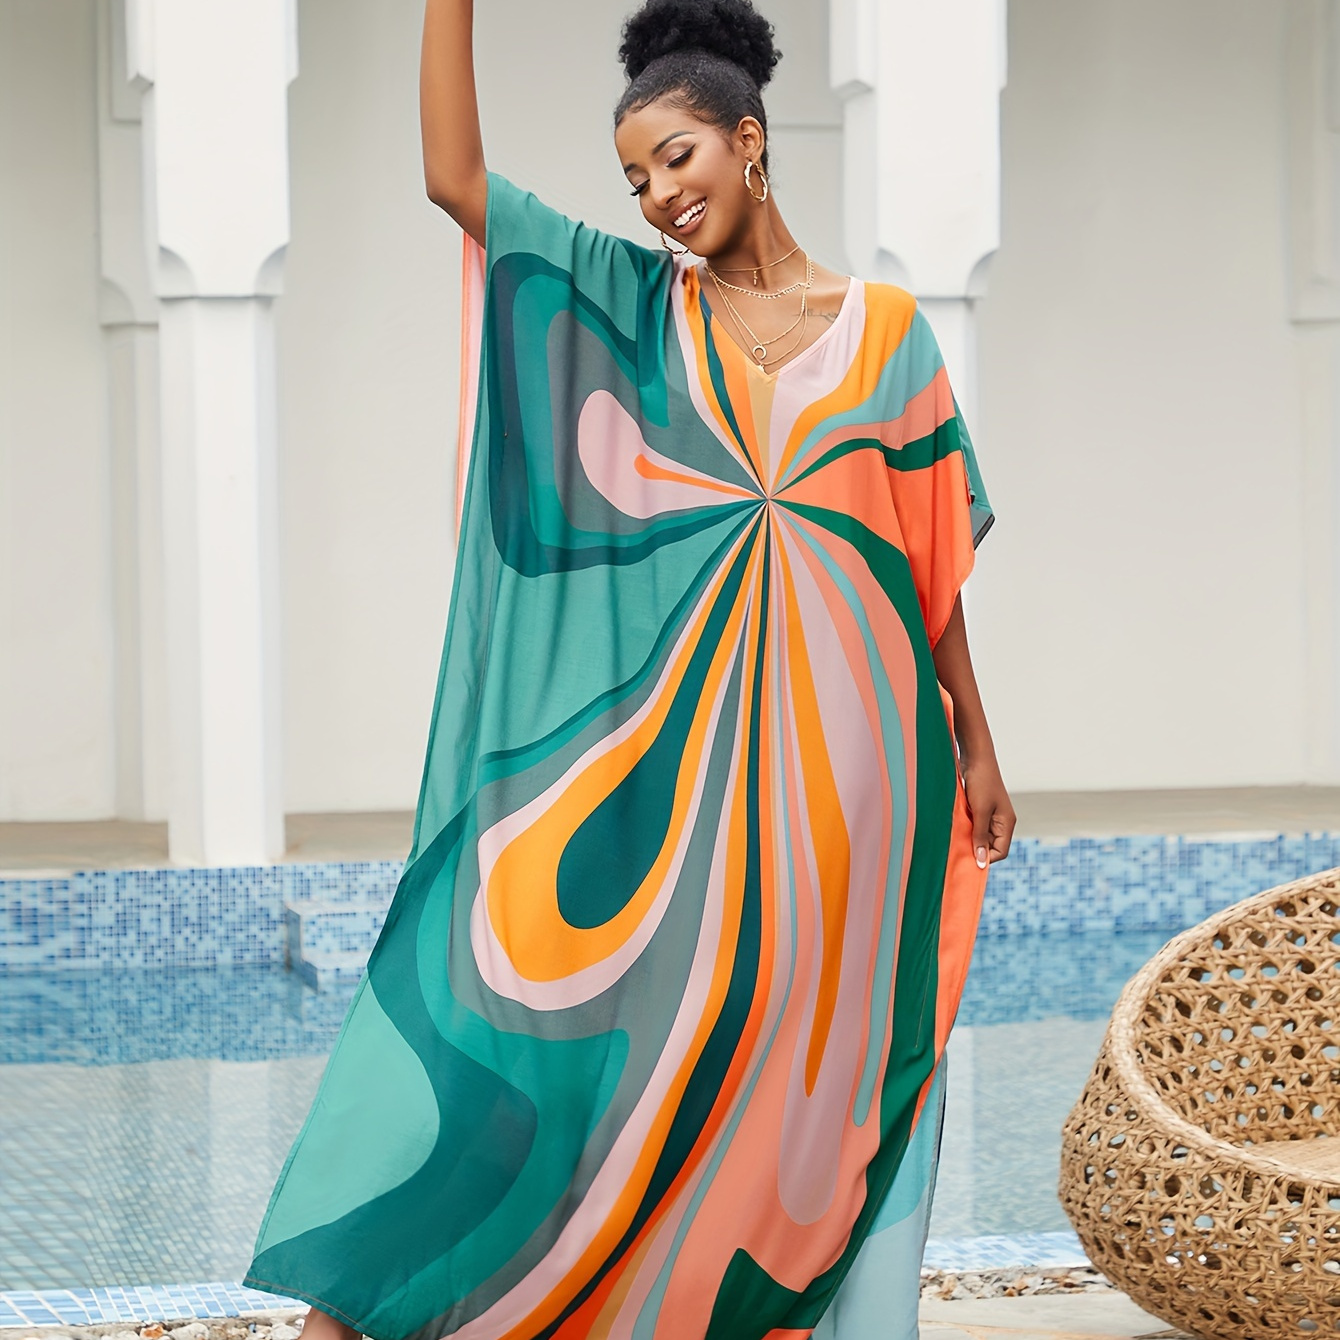 

Colorful Abstract Print Side Split Cover Up Dress, Loose Fit V Neck Boho Style Beach Kaftan, Women's Swimwear & Clothing